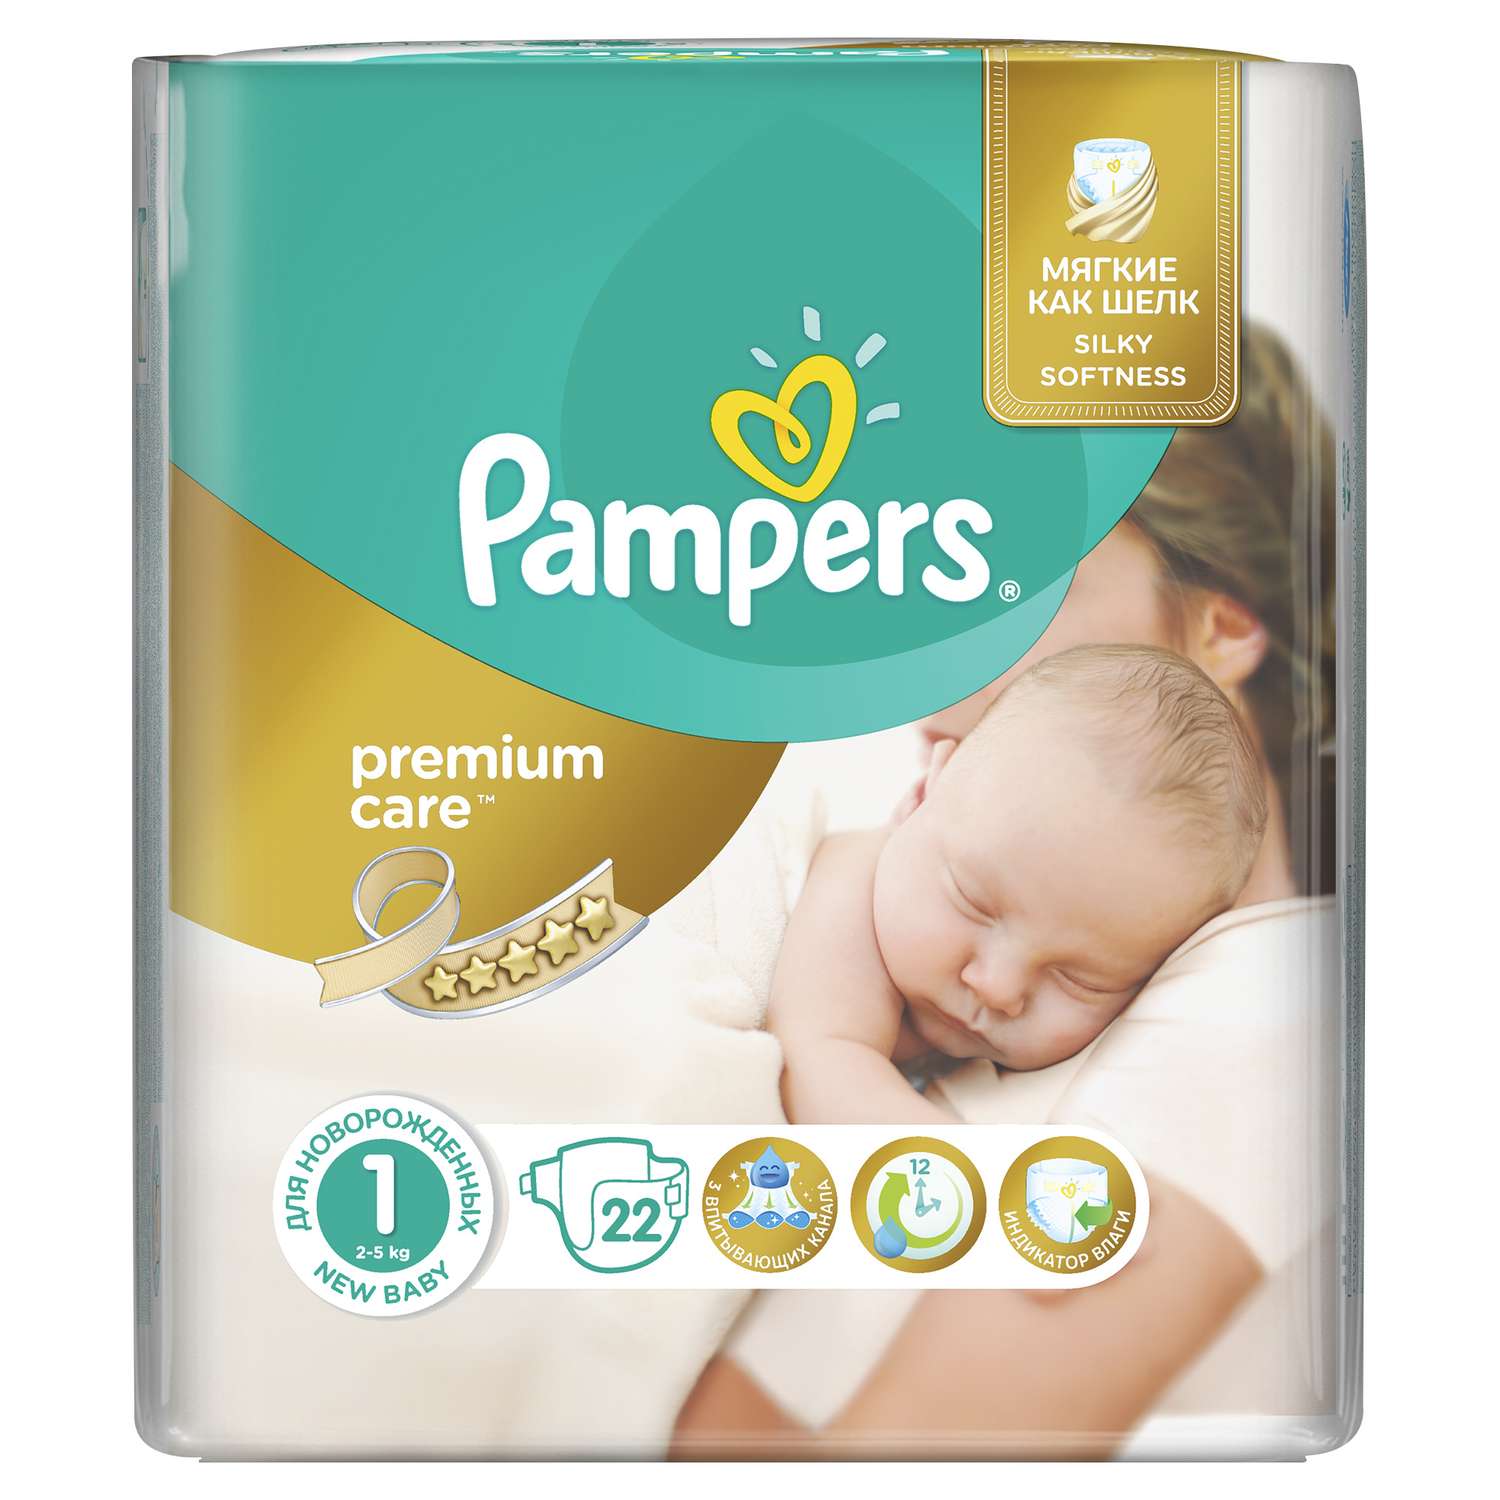 pro care pampers